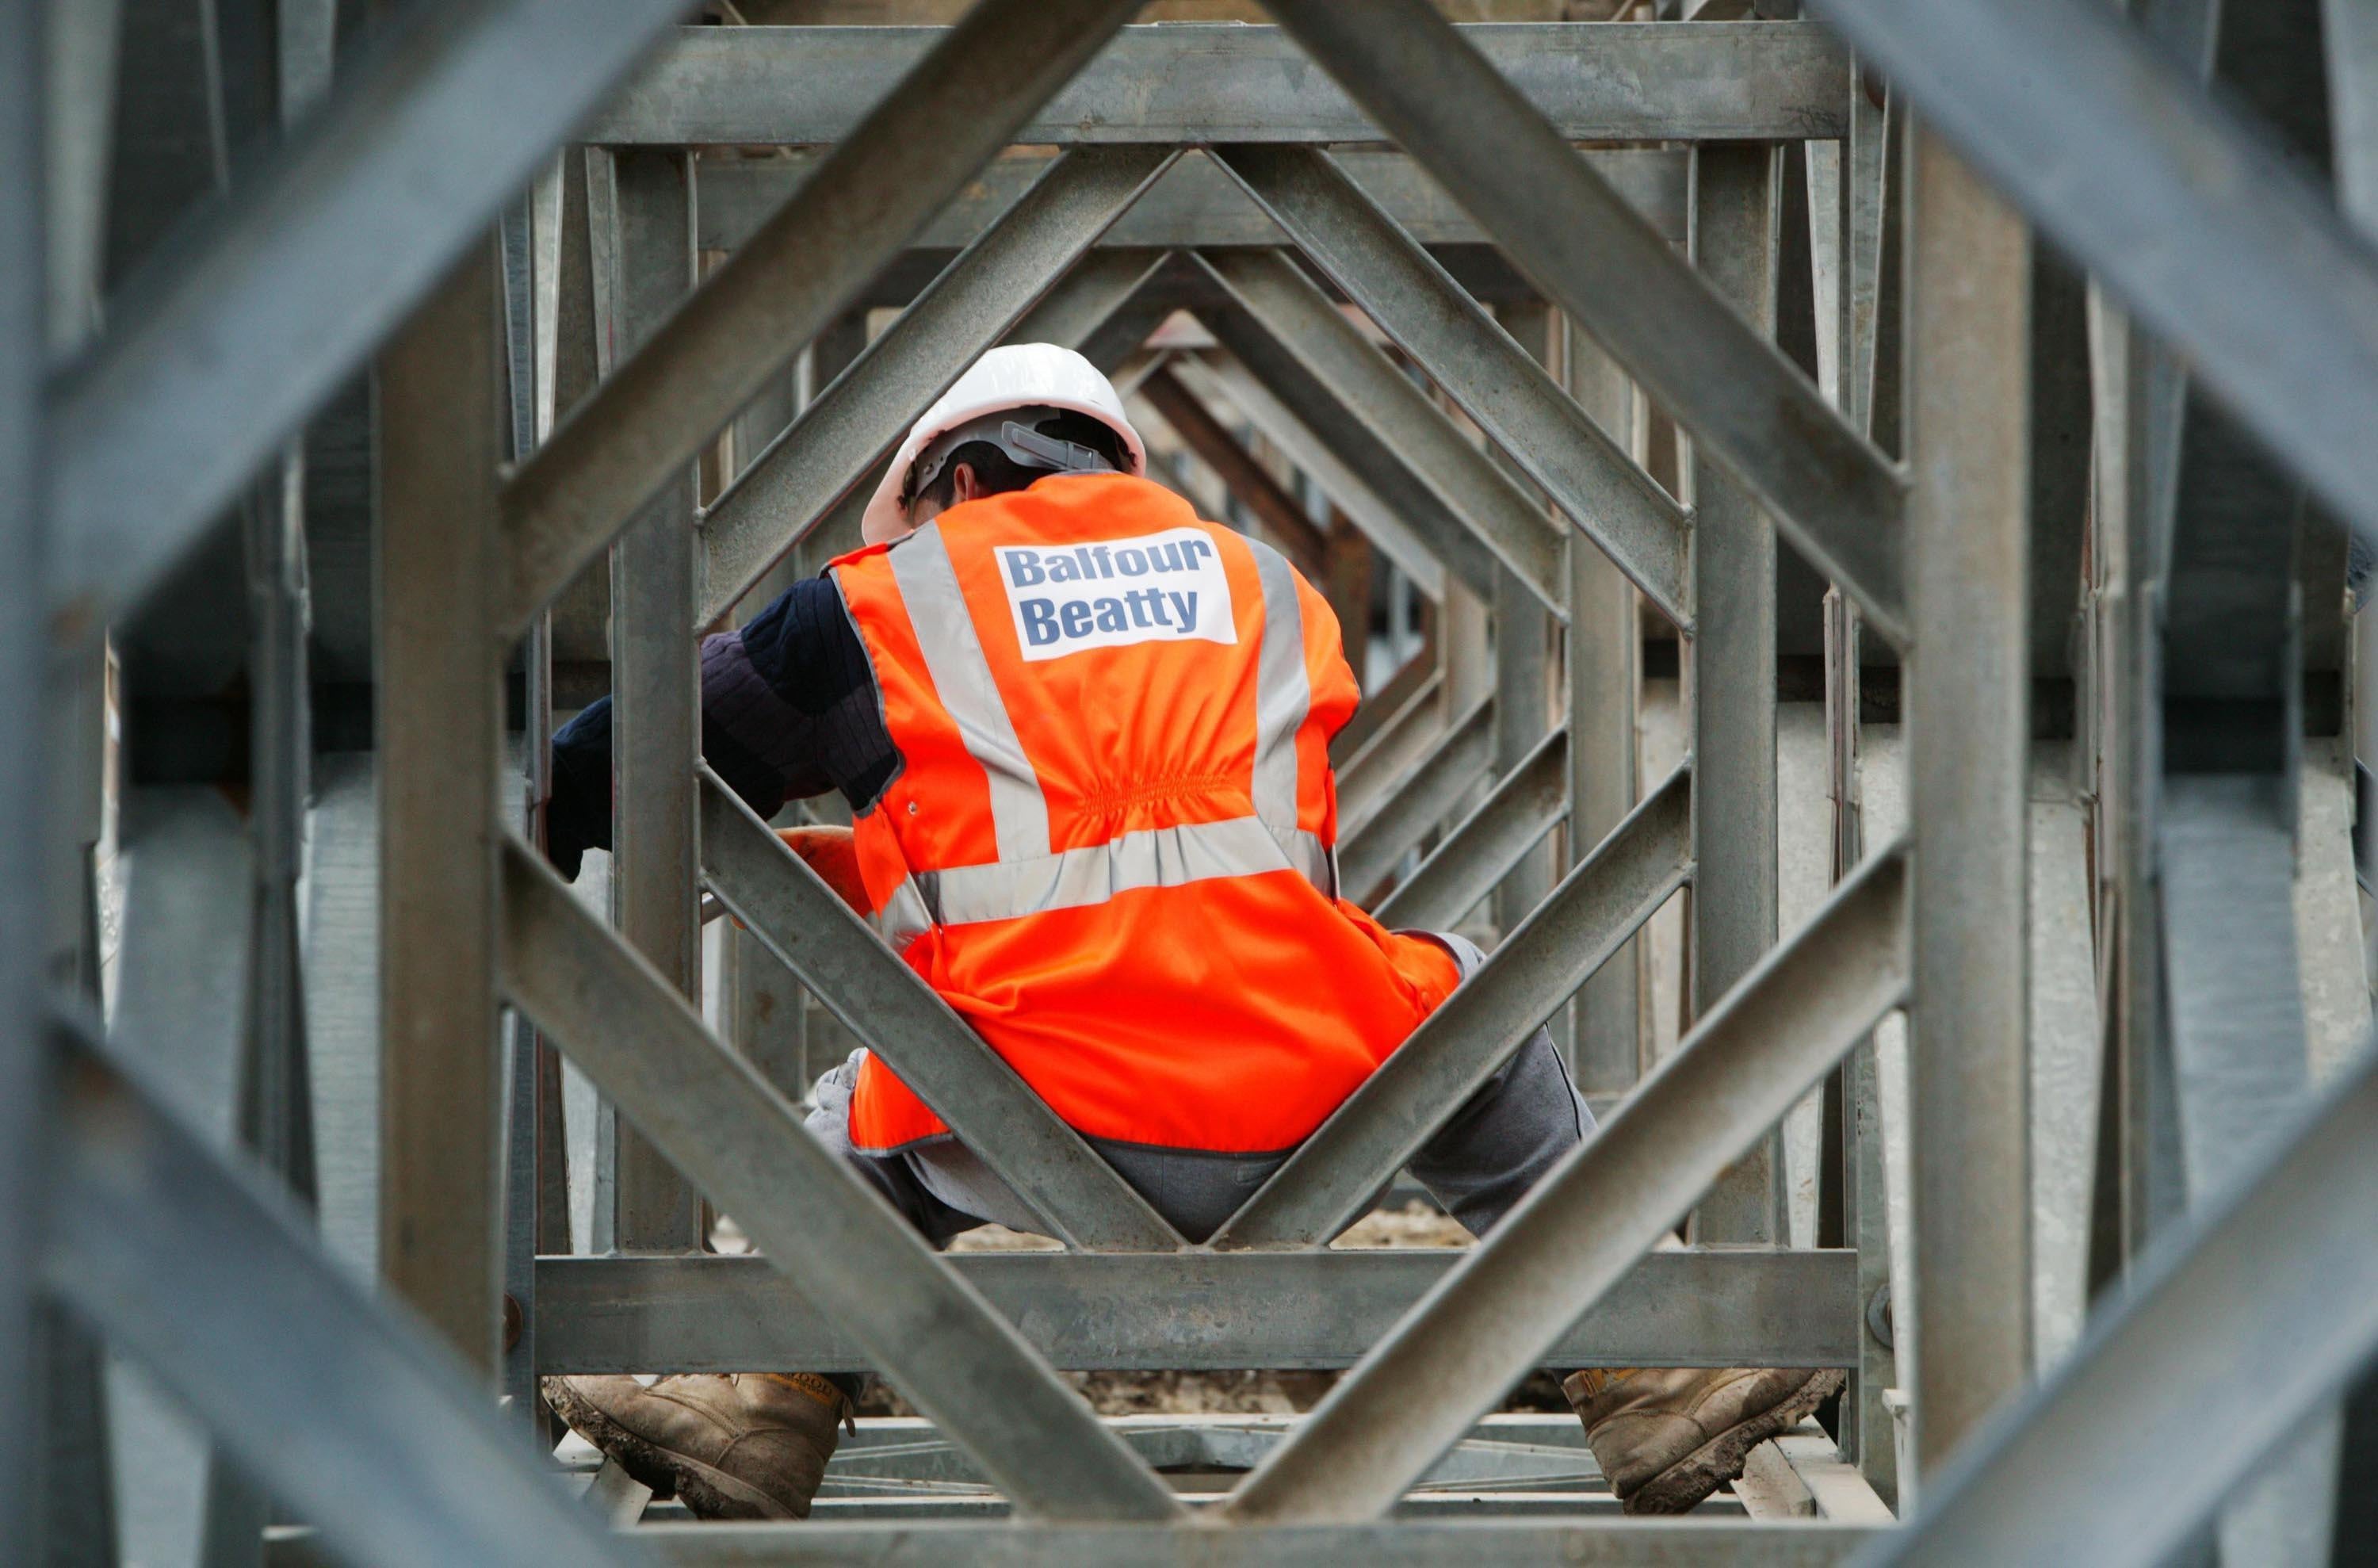 Balfour Beatty saw a loss in its UK construction division due to delays in central London (Newscast/Balfour Beatty/PA)